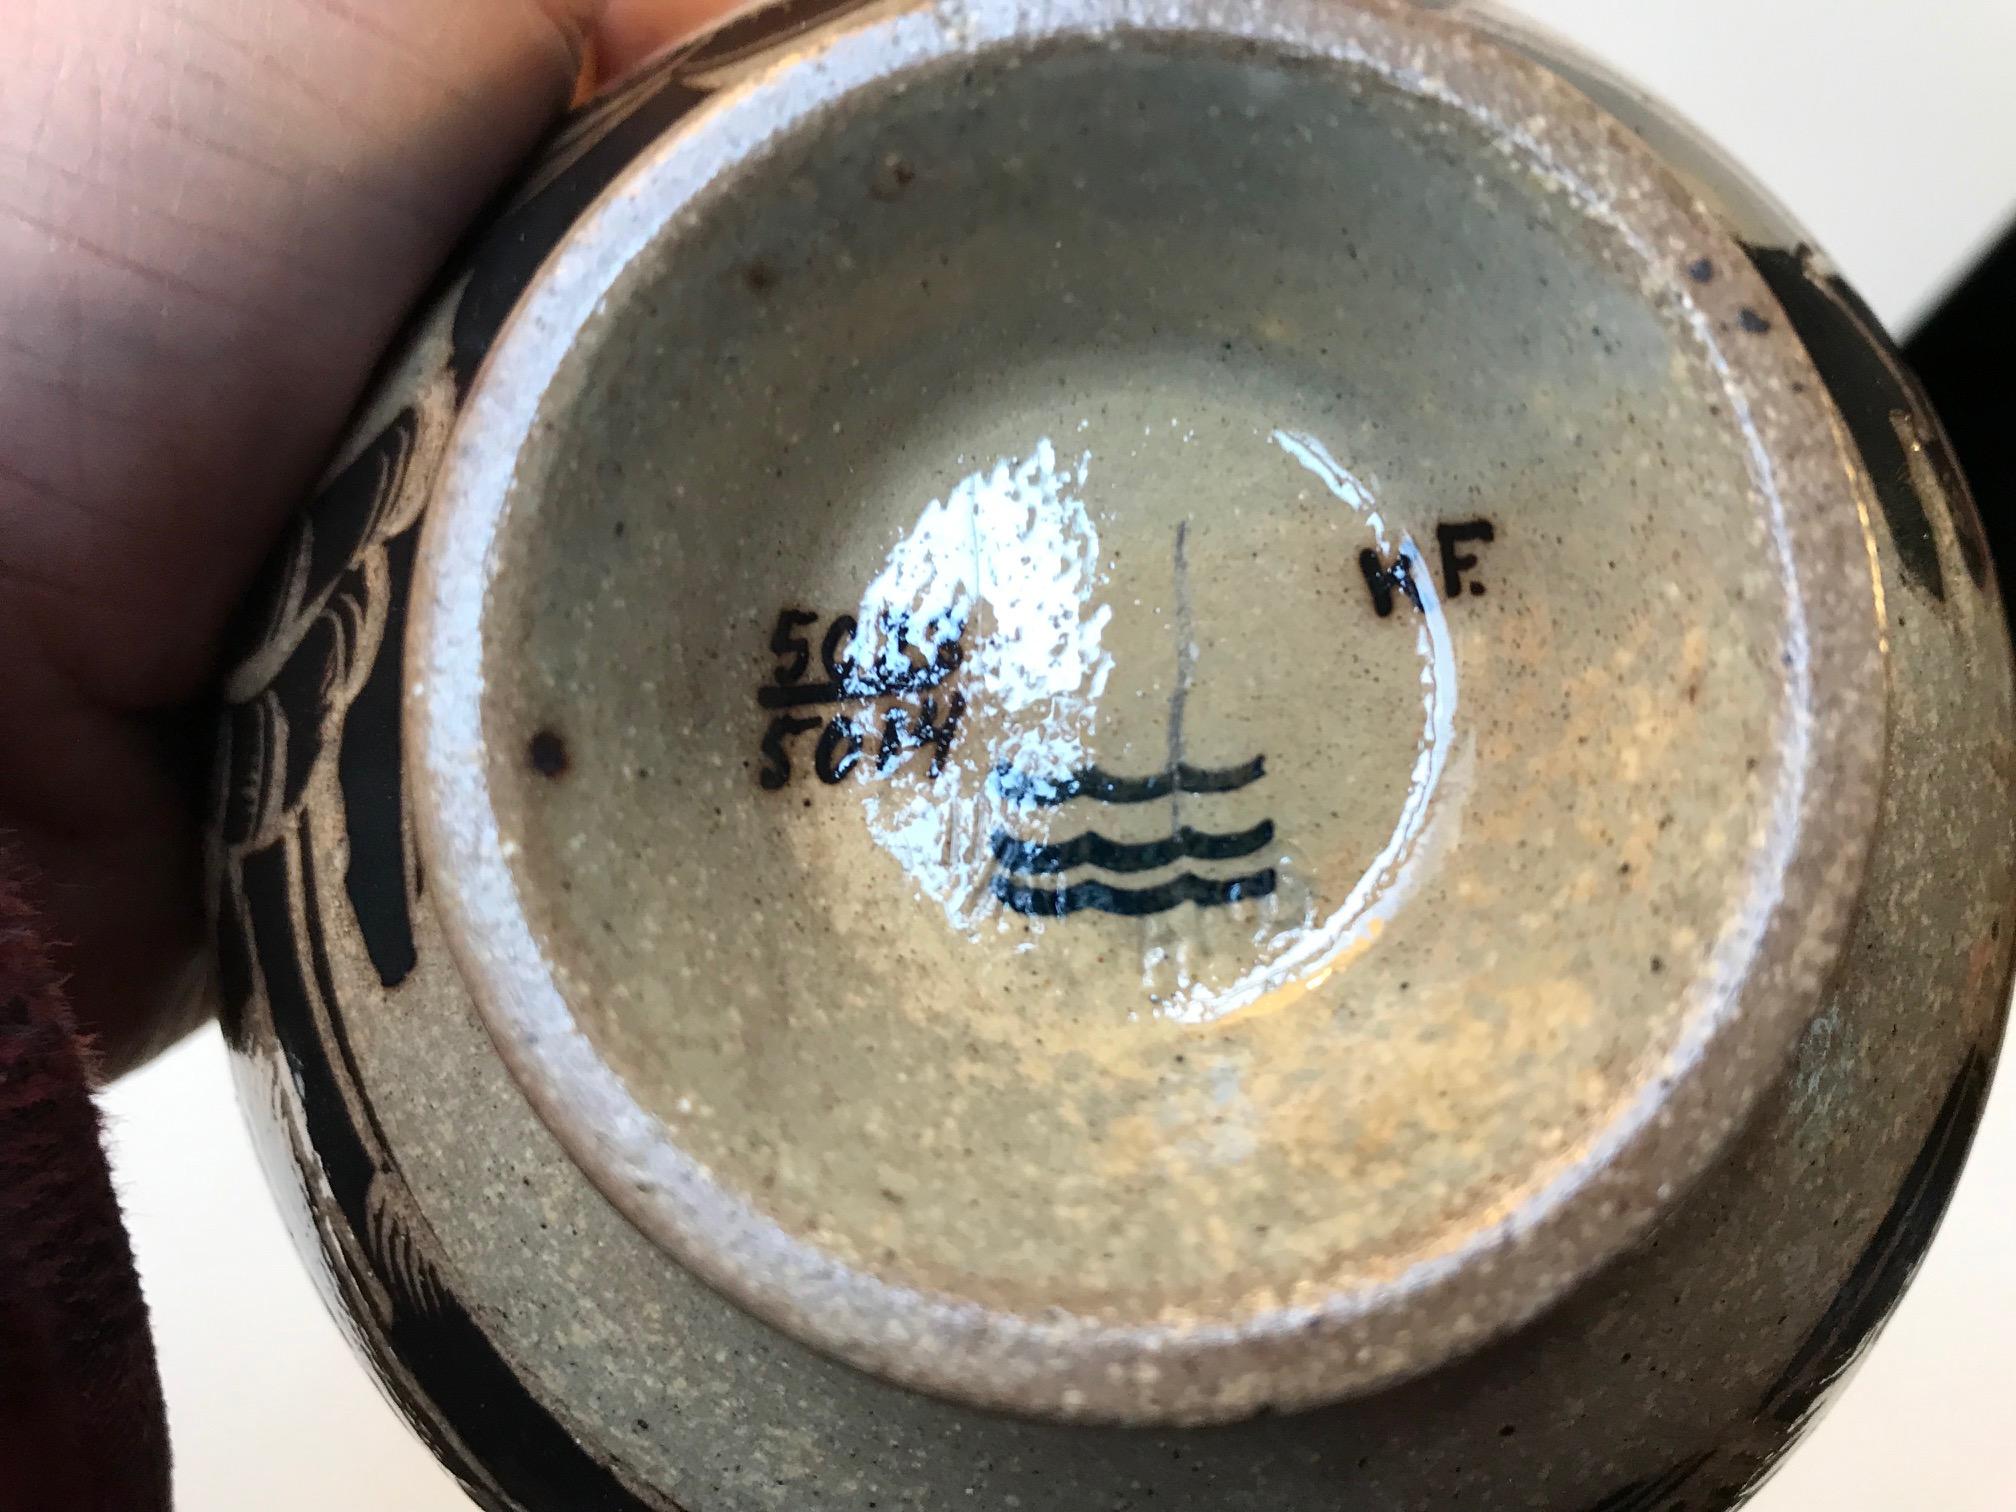 Footed stoneware bowl with black flowers, cliffs and a small black man. Designed by Gerd Hjort Petersen during the 1960s and manufactured by Royal Copenhagen. Fully marked, numbered and signed to the base.